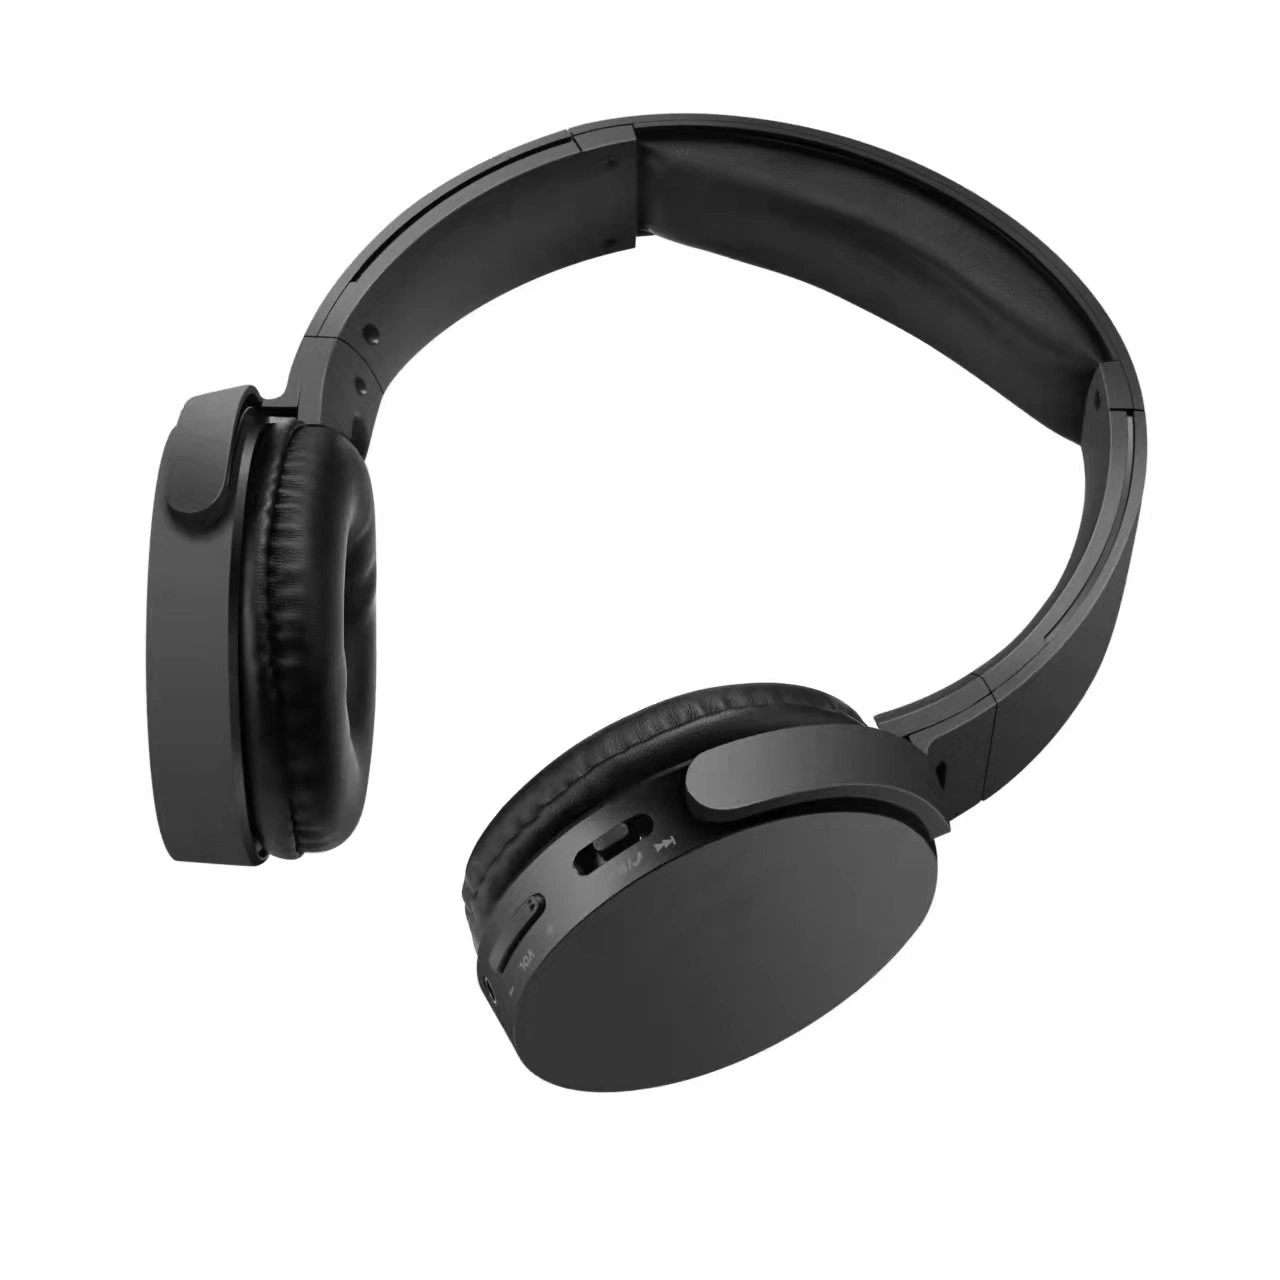 Comfortable Material CE and RoHS Wireless Headset on Ear Stereo Bluetooth Headphone Hands Free Microphone Mobile Phone Earphone Sport Sweatproof Earbuds